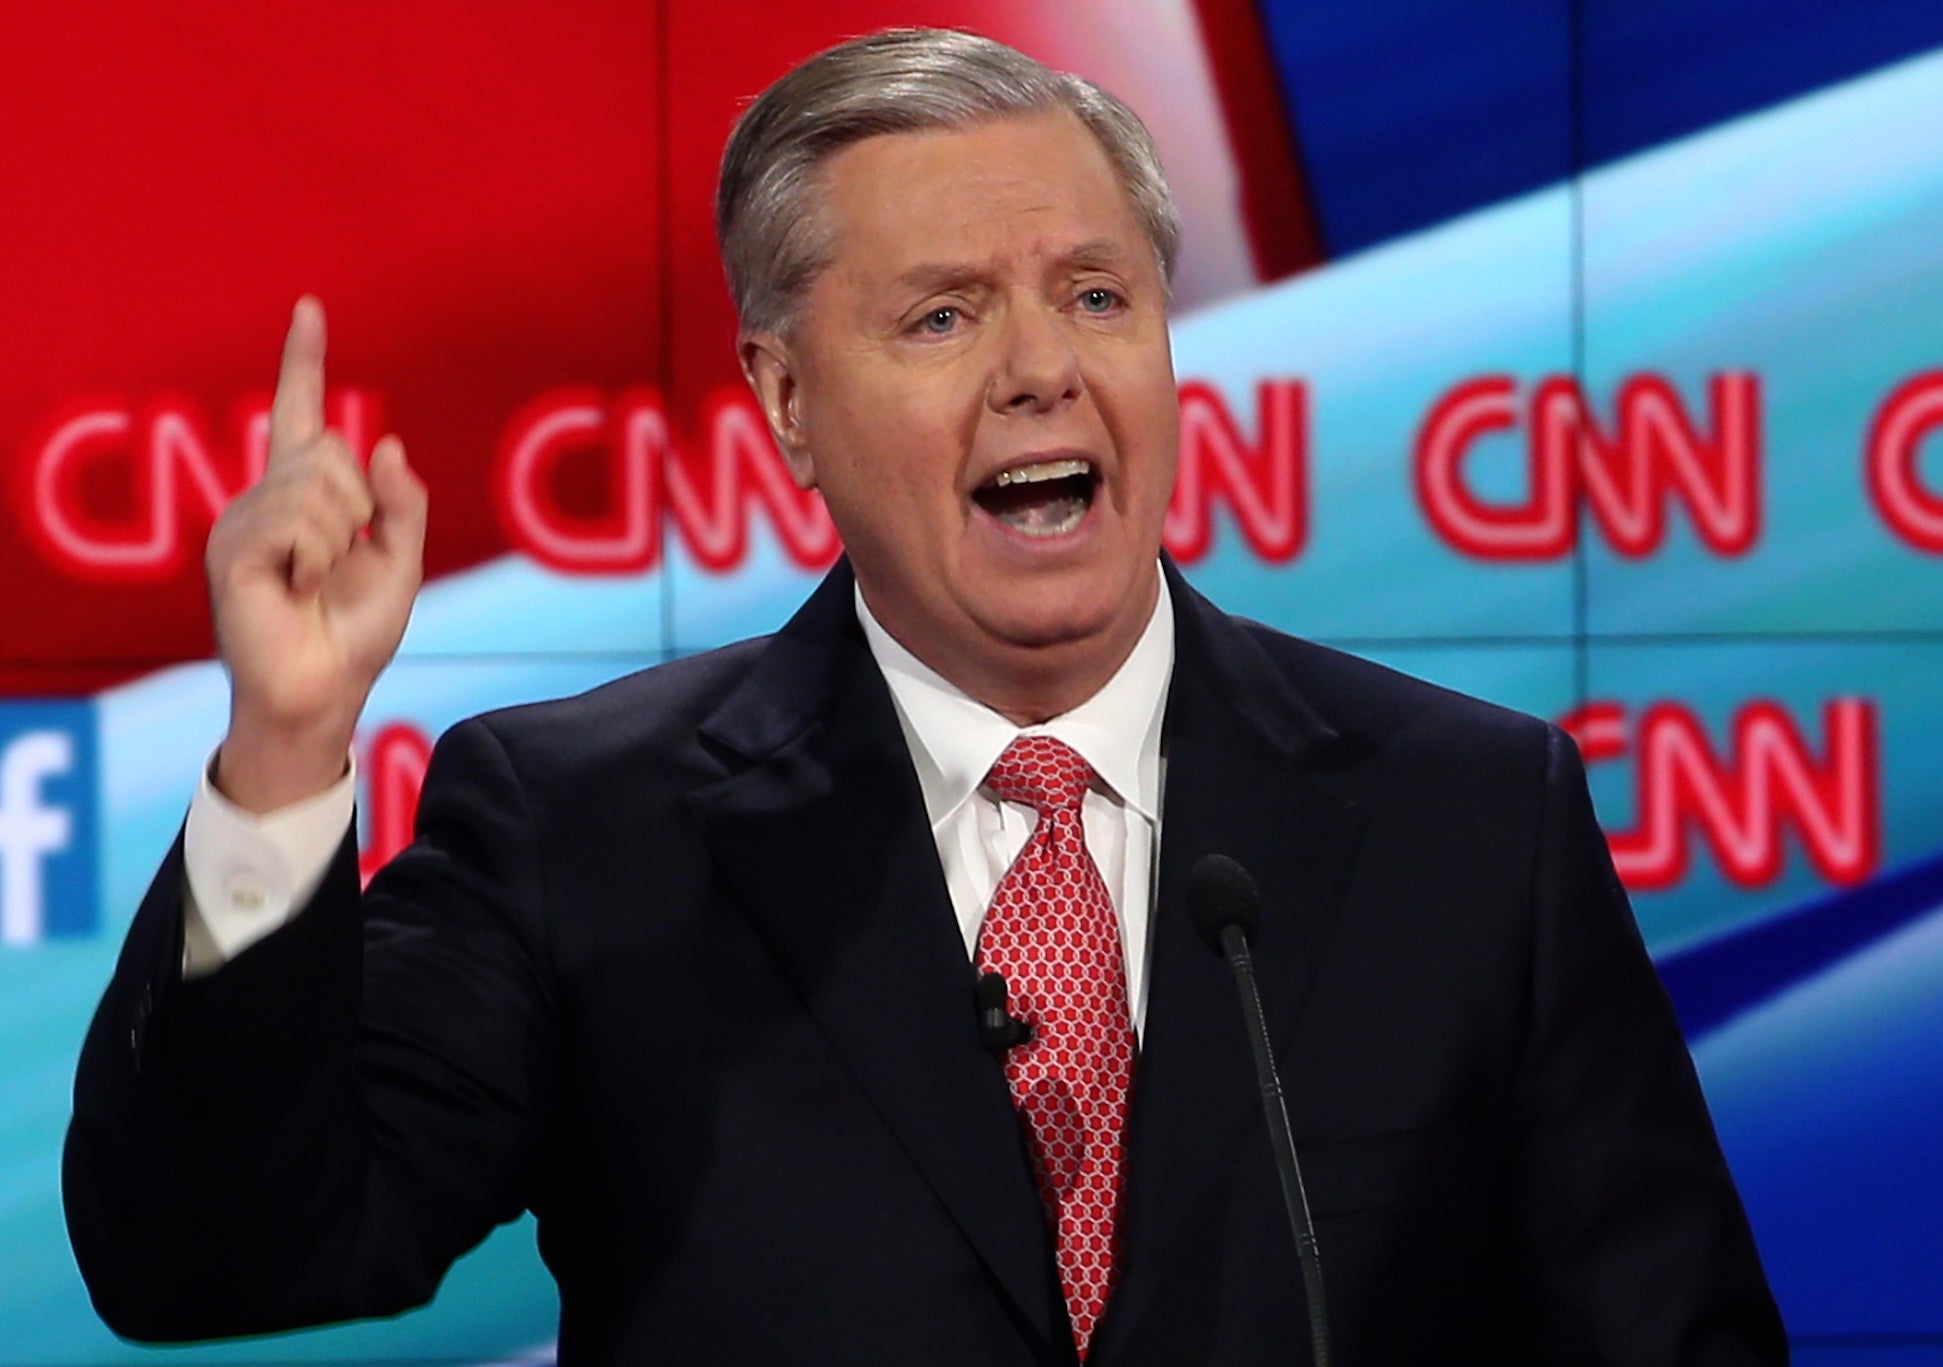 Lindsey Graham said on Sunday he will ask Donald Trump to nominate a conservative justice to possibly replace Ruth Bader Ginsburg if the 85-year-old justice steps down from her post during his presidency.